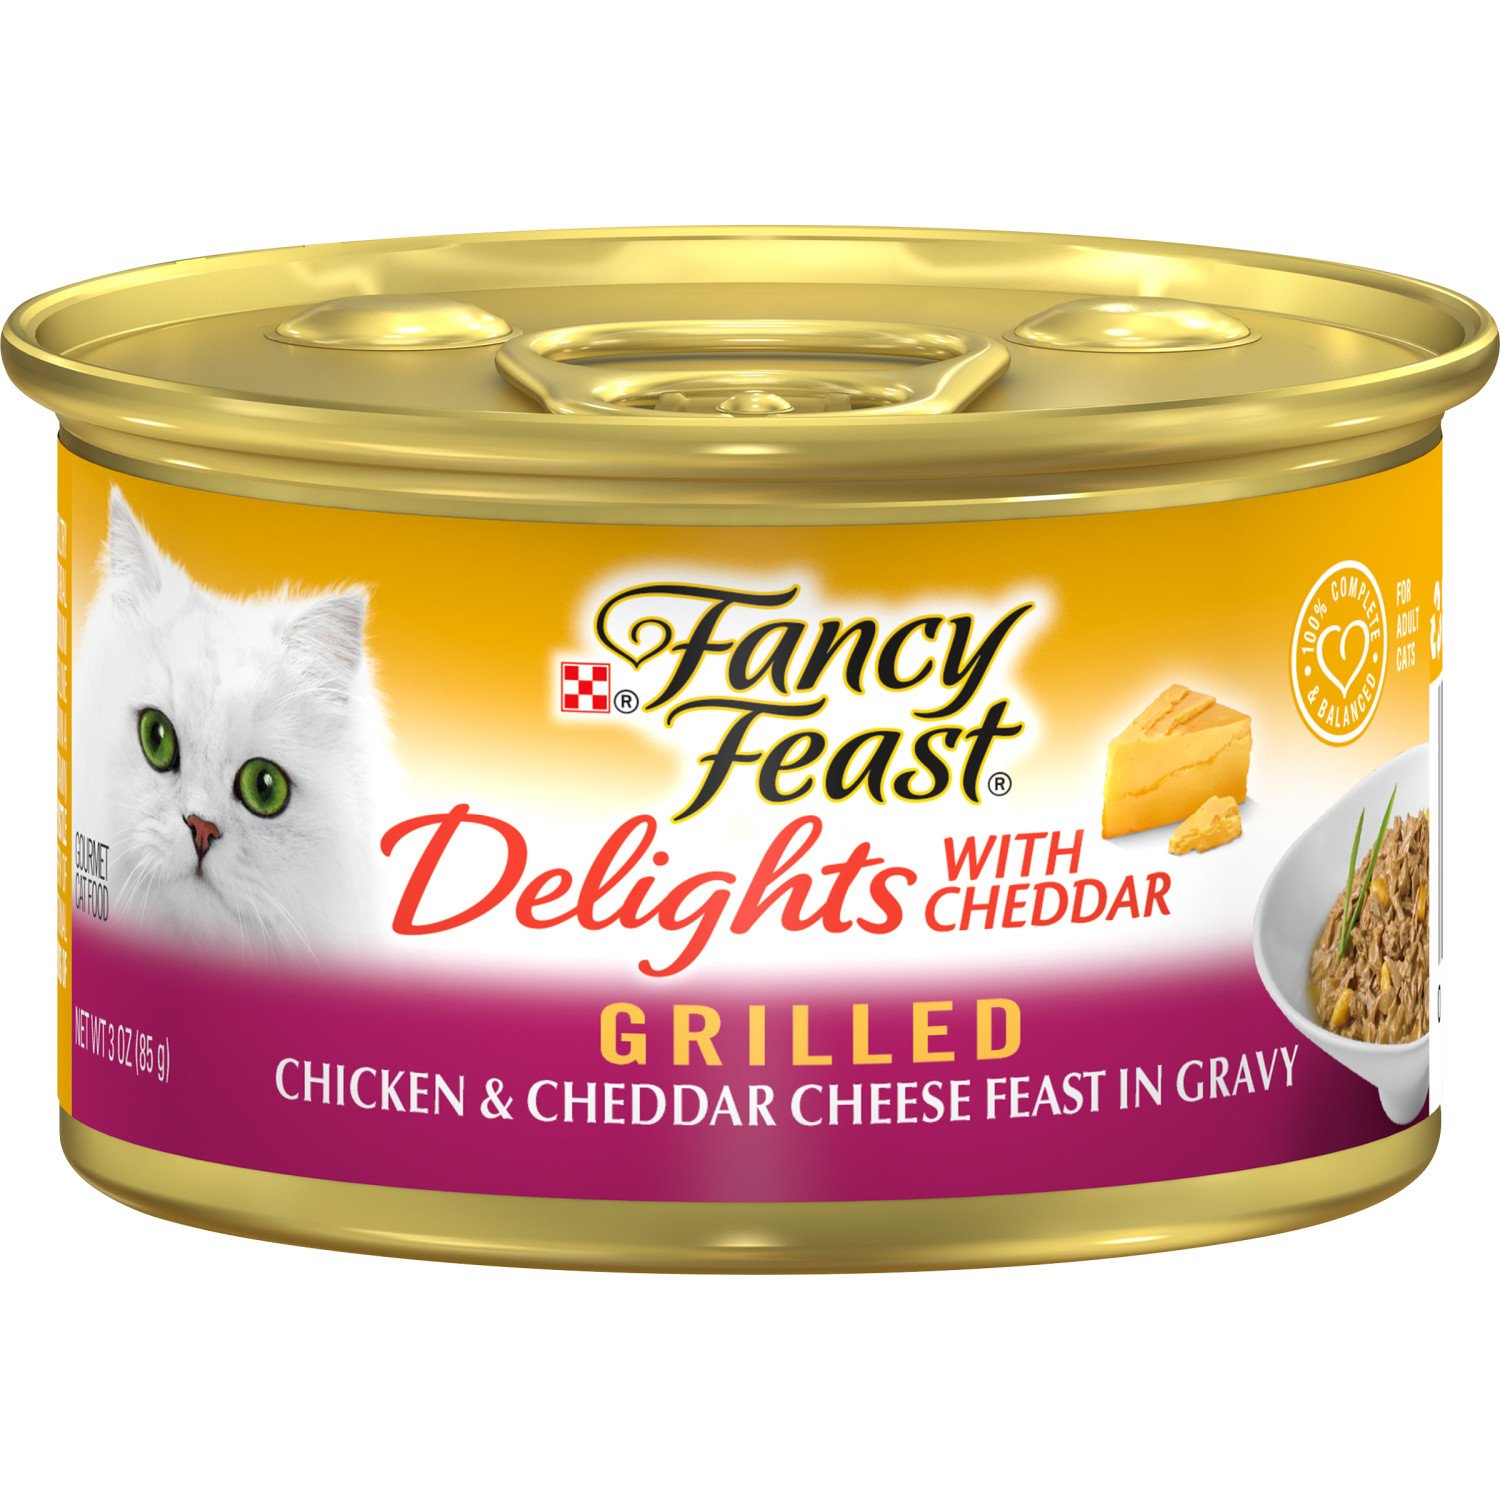 Purina Fancy Feast Delights with Chicken & Cheddar Cheese Feast in